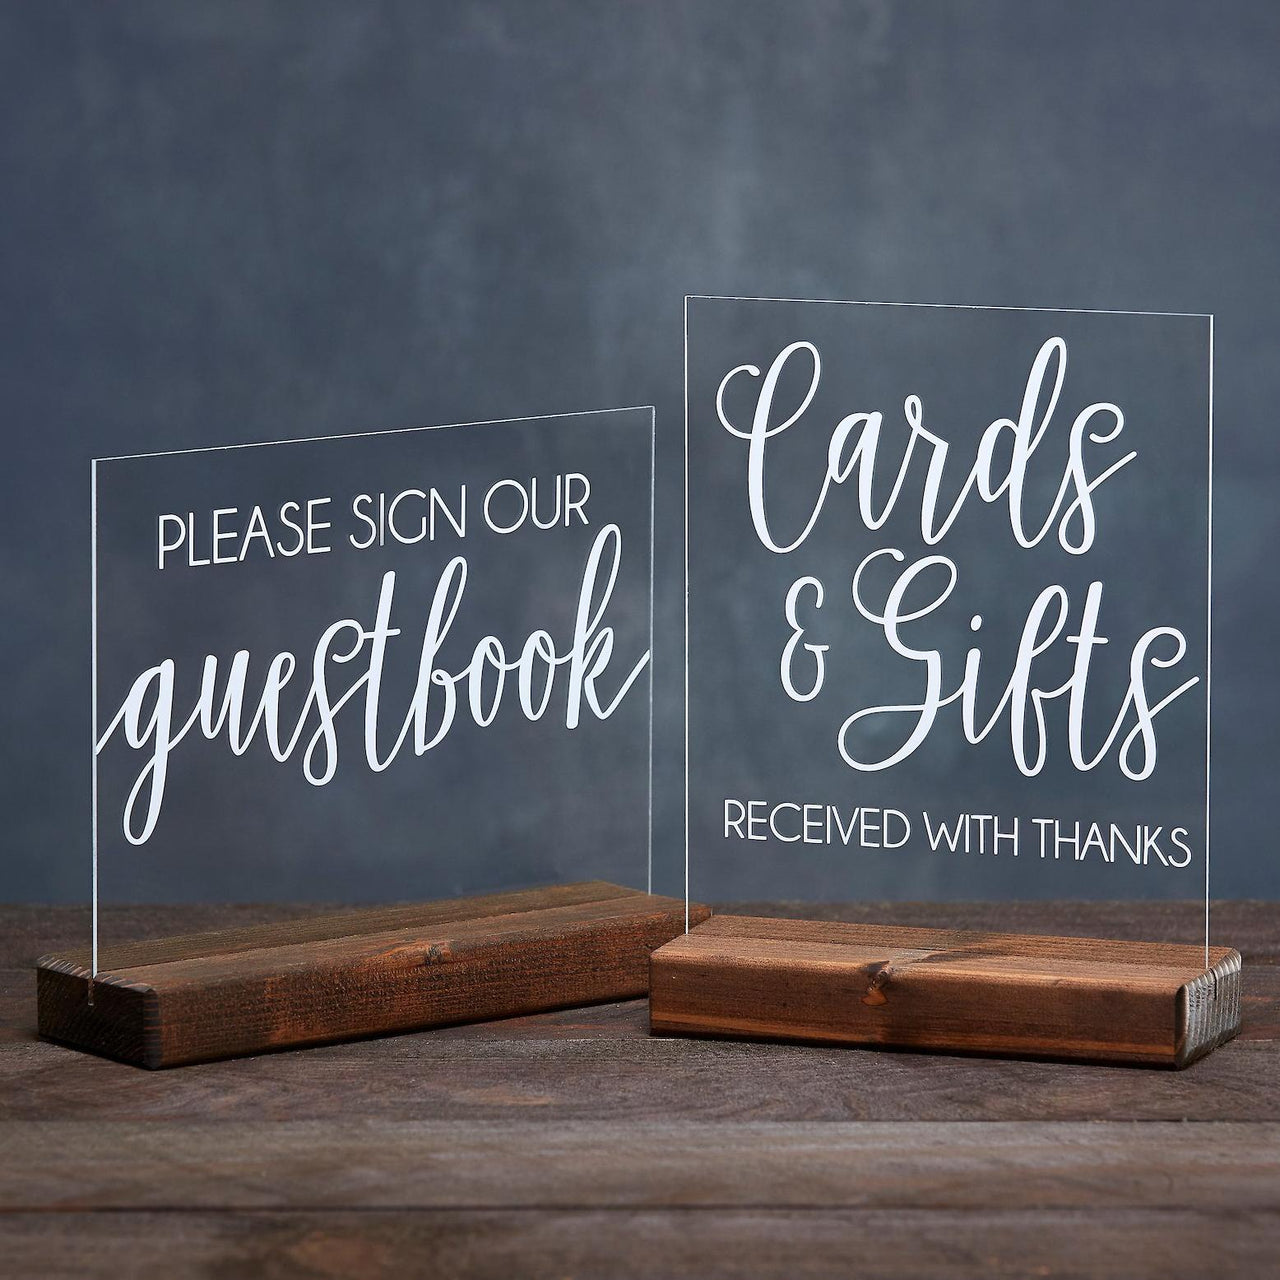 Cards and Gifts Acrylic Sign & Wedding Guestbook Acrylic Sign, Set of 2 - Rich Design Co